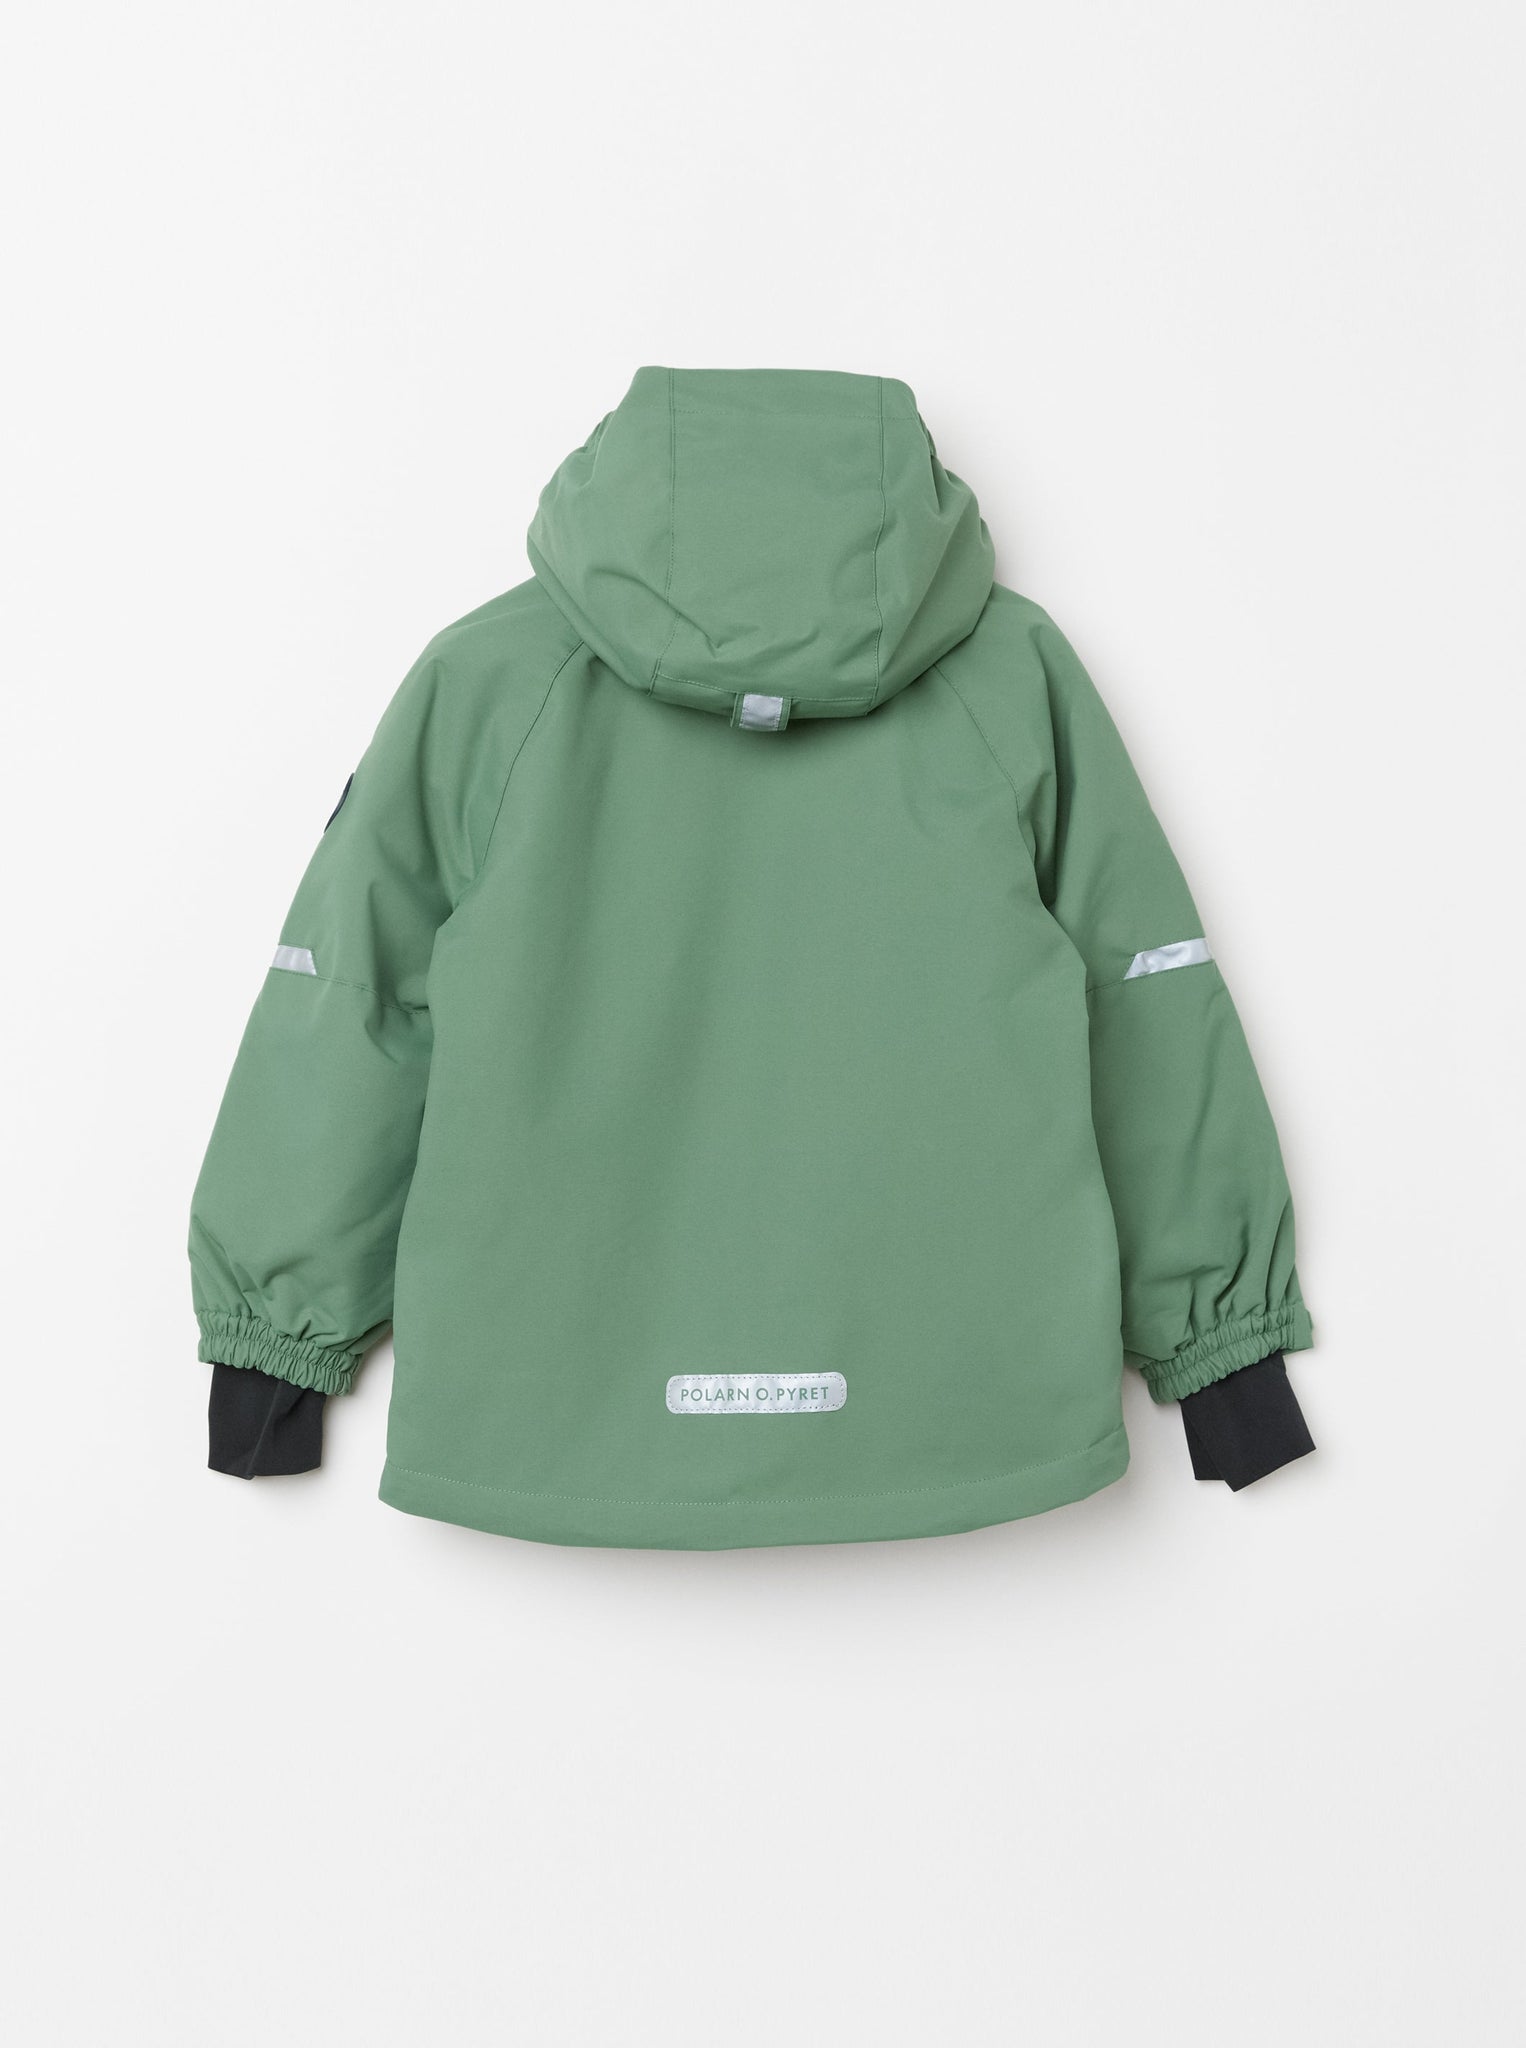 Padded Green Kids Waterproof Coat from the Polarn O. Pyret kidswear collection. Quality kids clothing made to last.